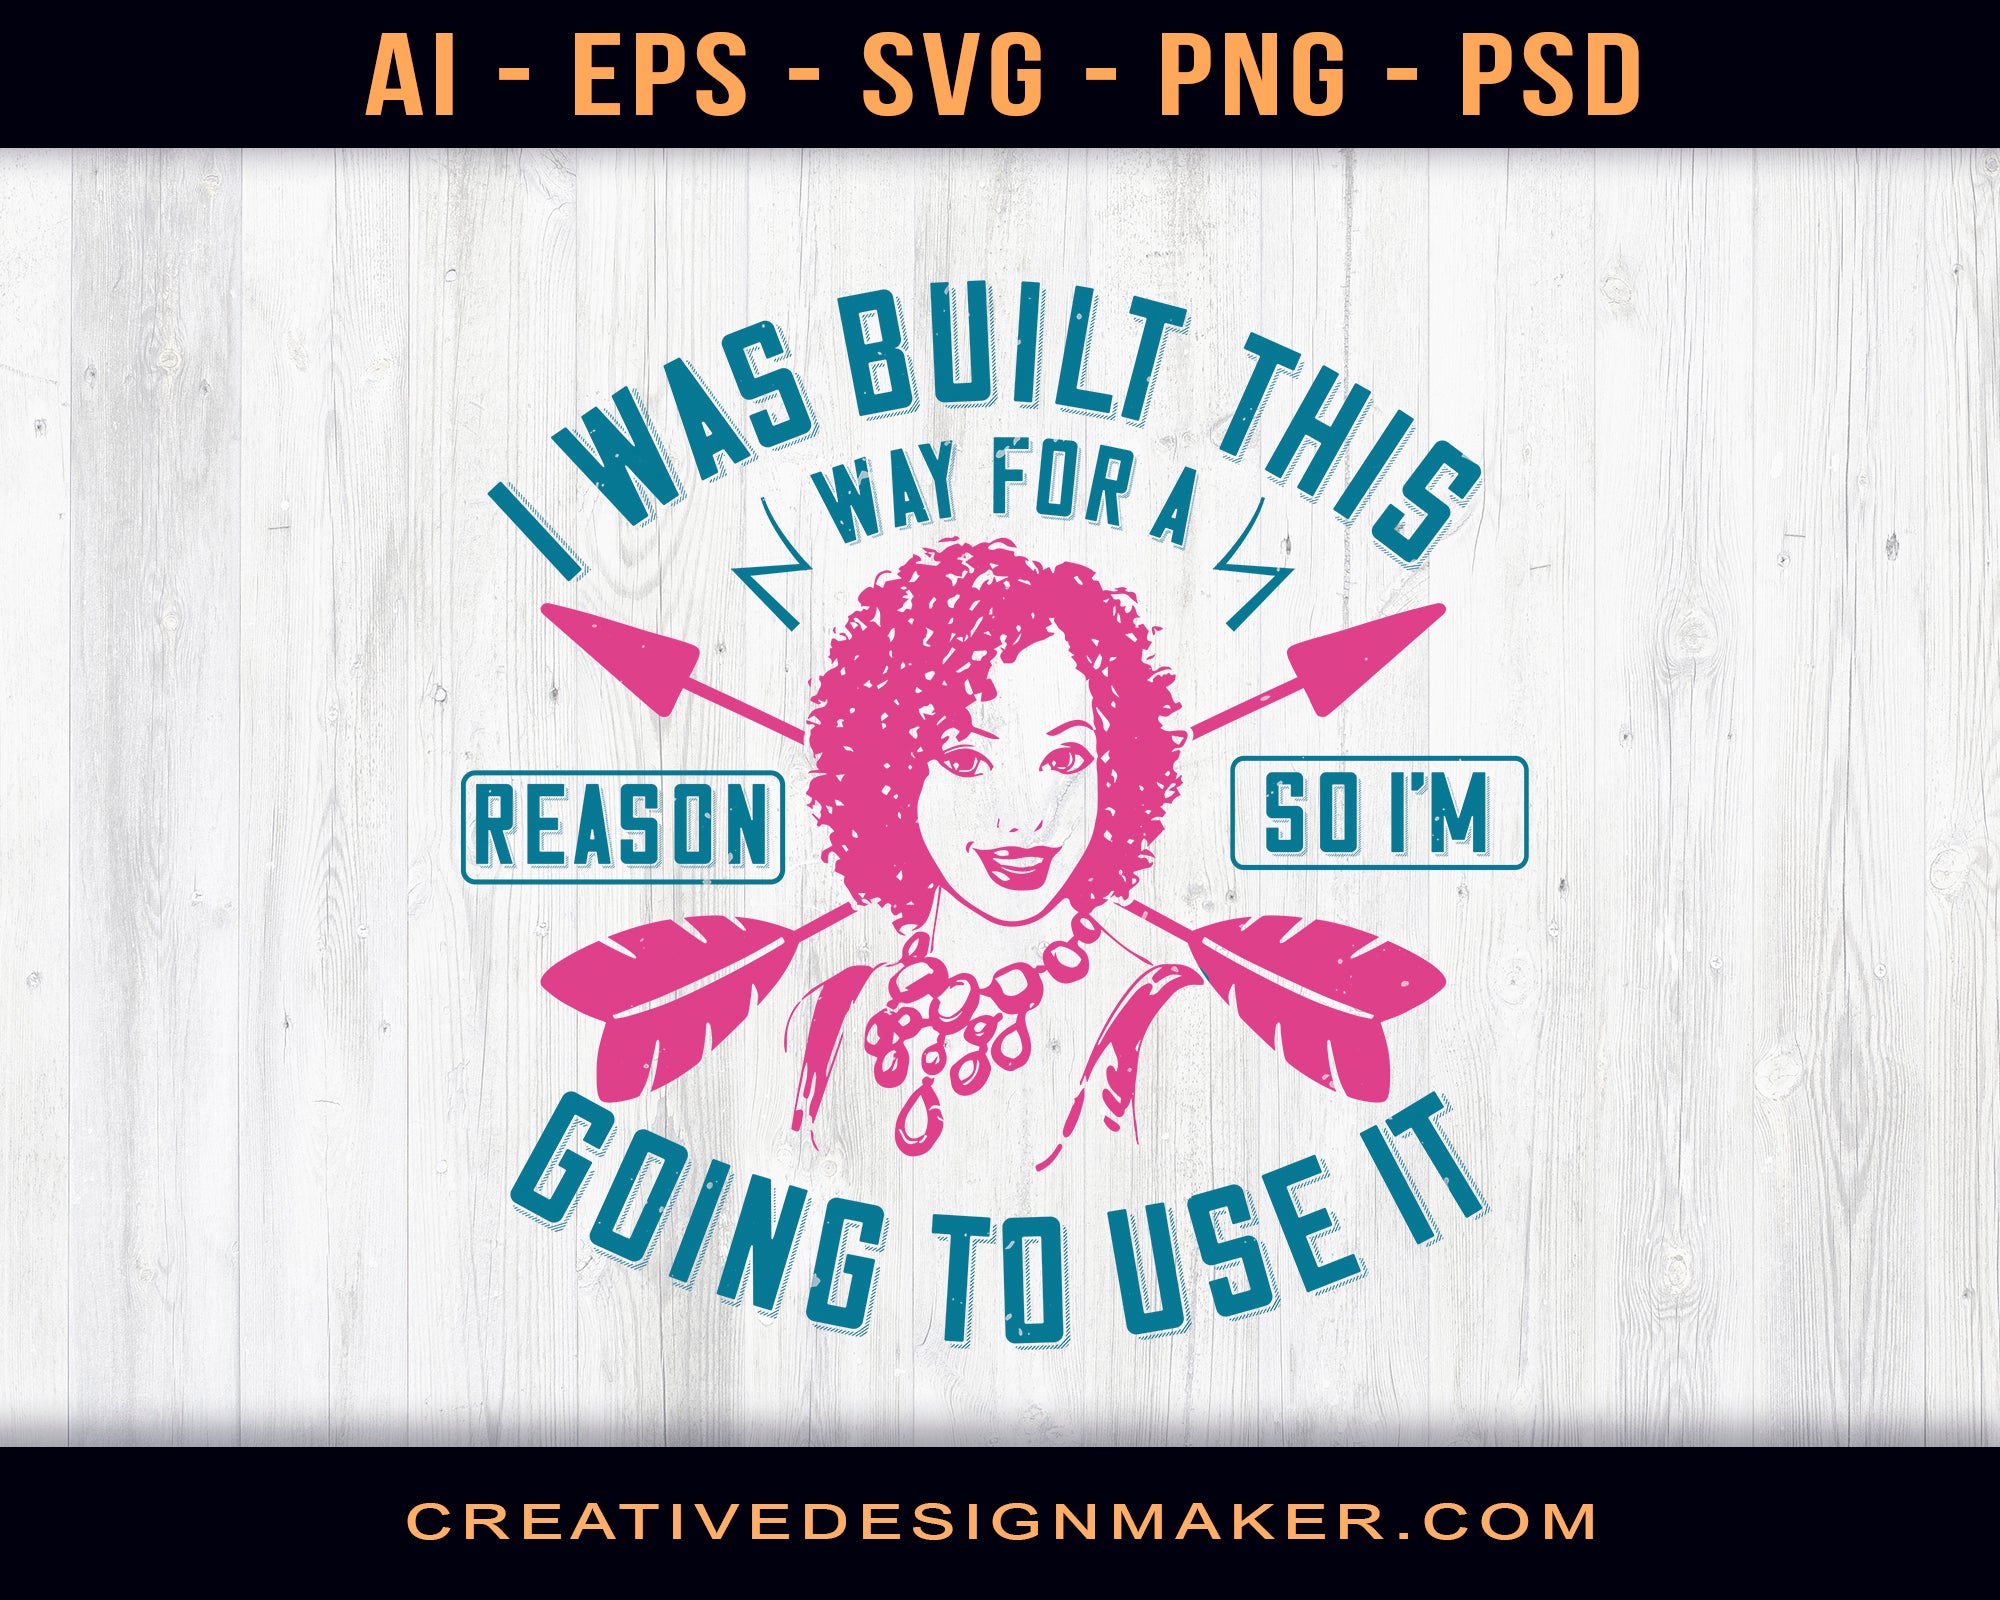 I Was Built This Way For A Reason, So I’m Going To Use It Afro Print Ready Editable T-Shirt SVG Design!